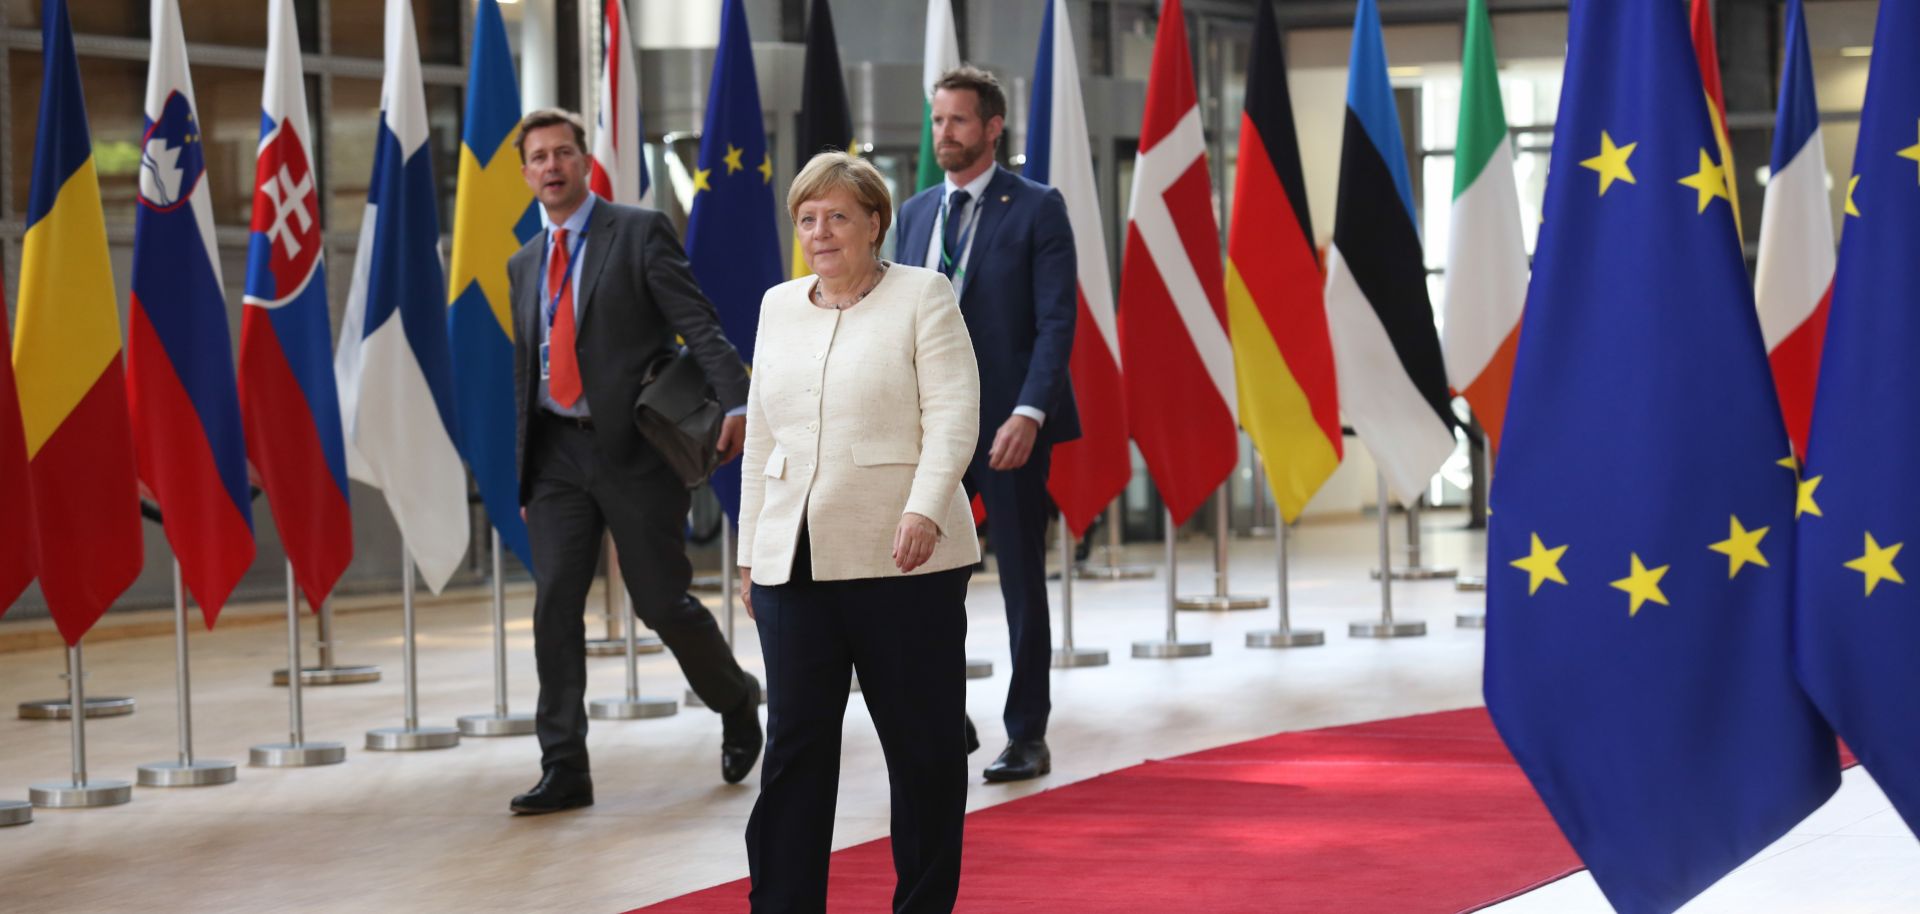 Angela Merkel walks down a red carpet lined with flags as she arrives at the Europa Building in Brussels, Belgium.